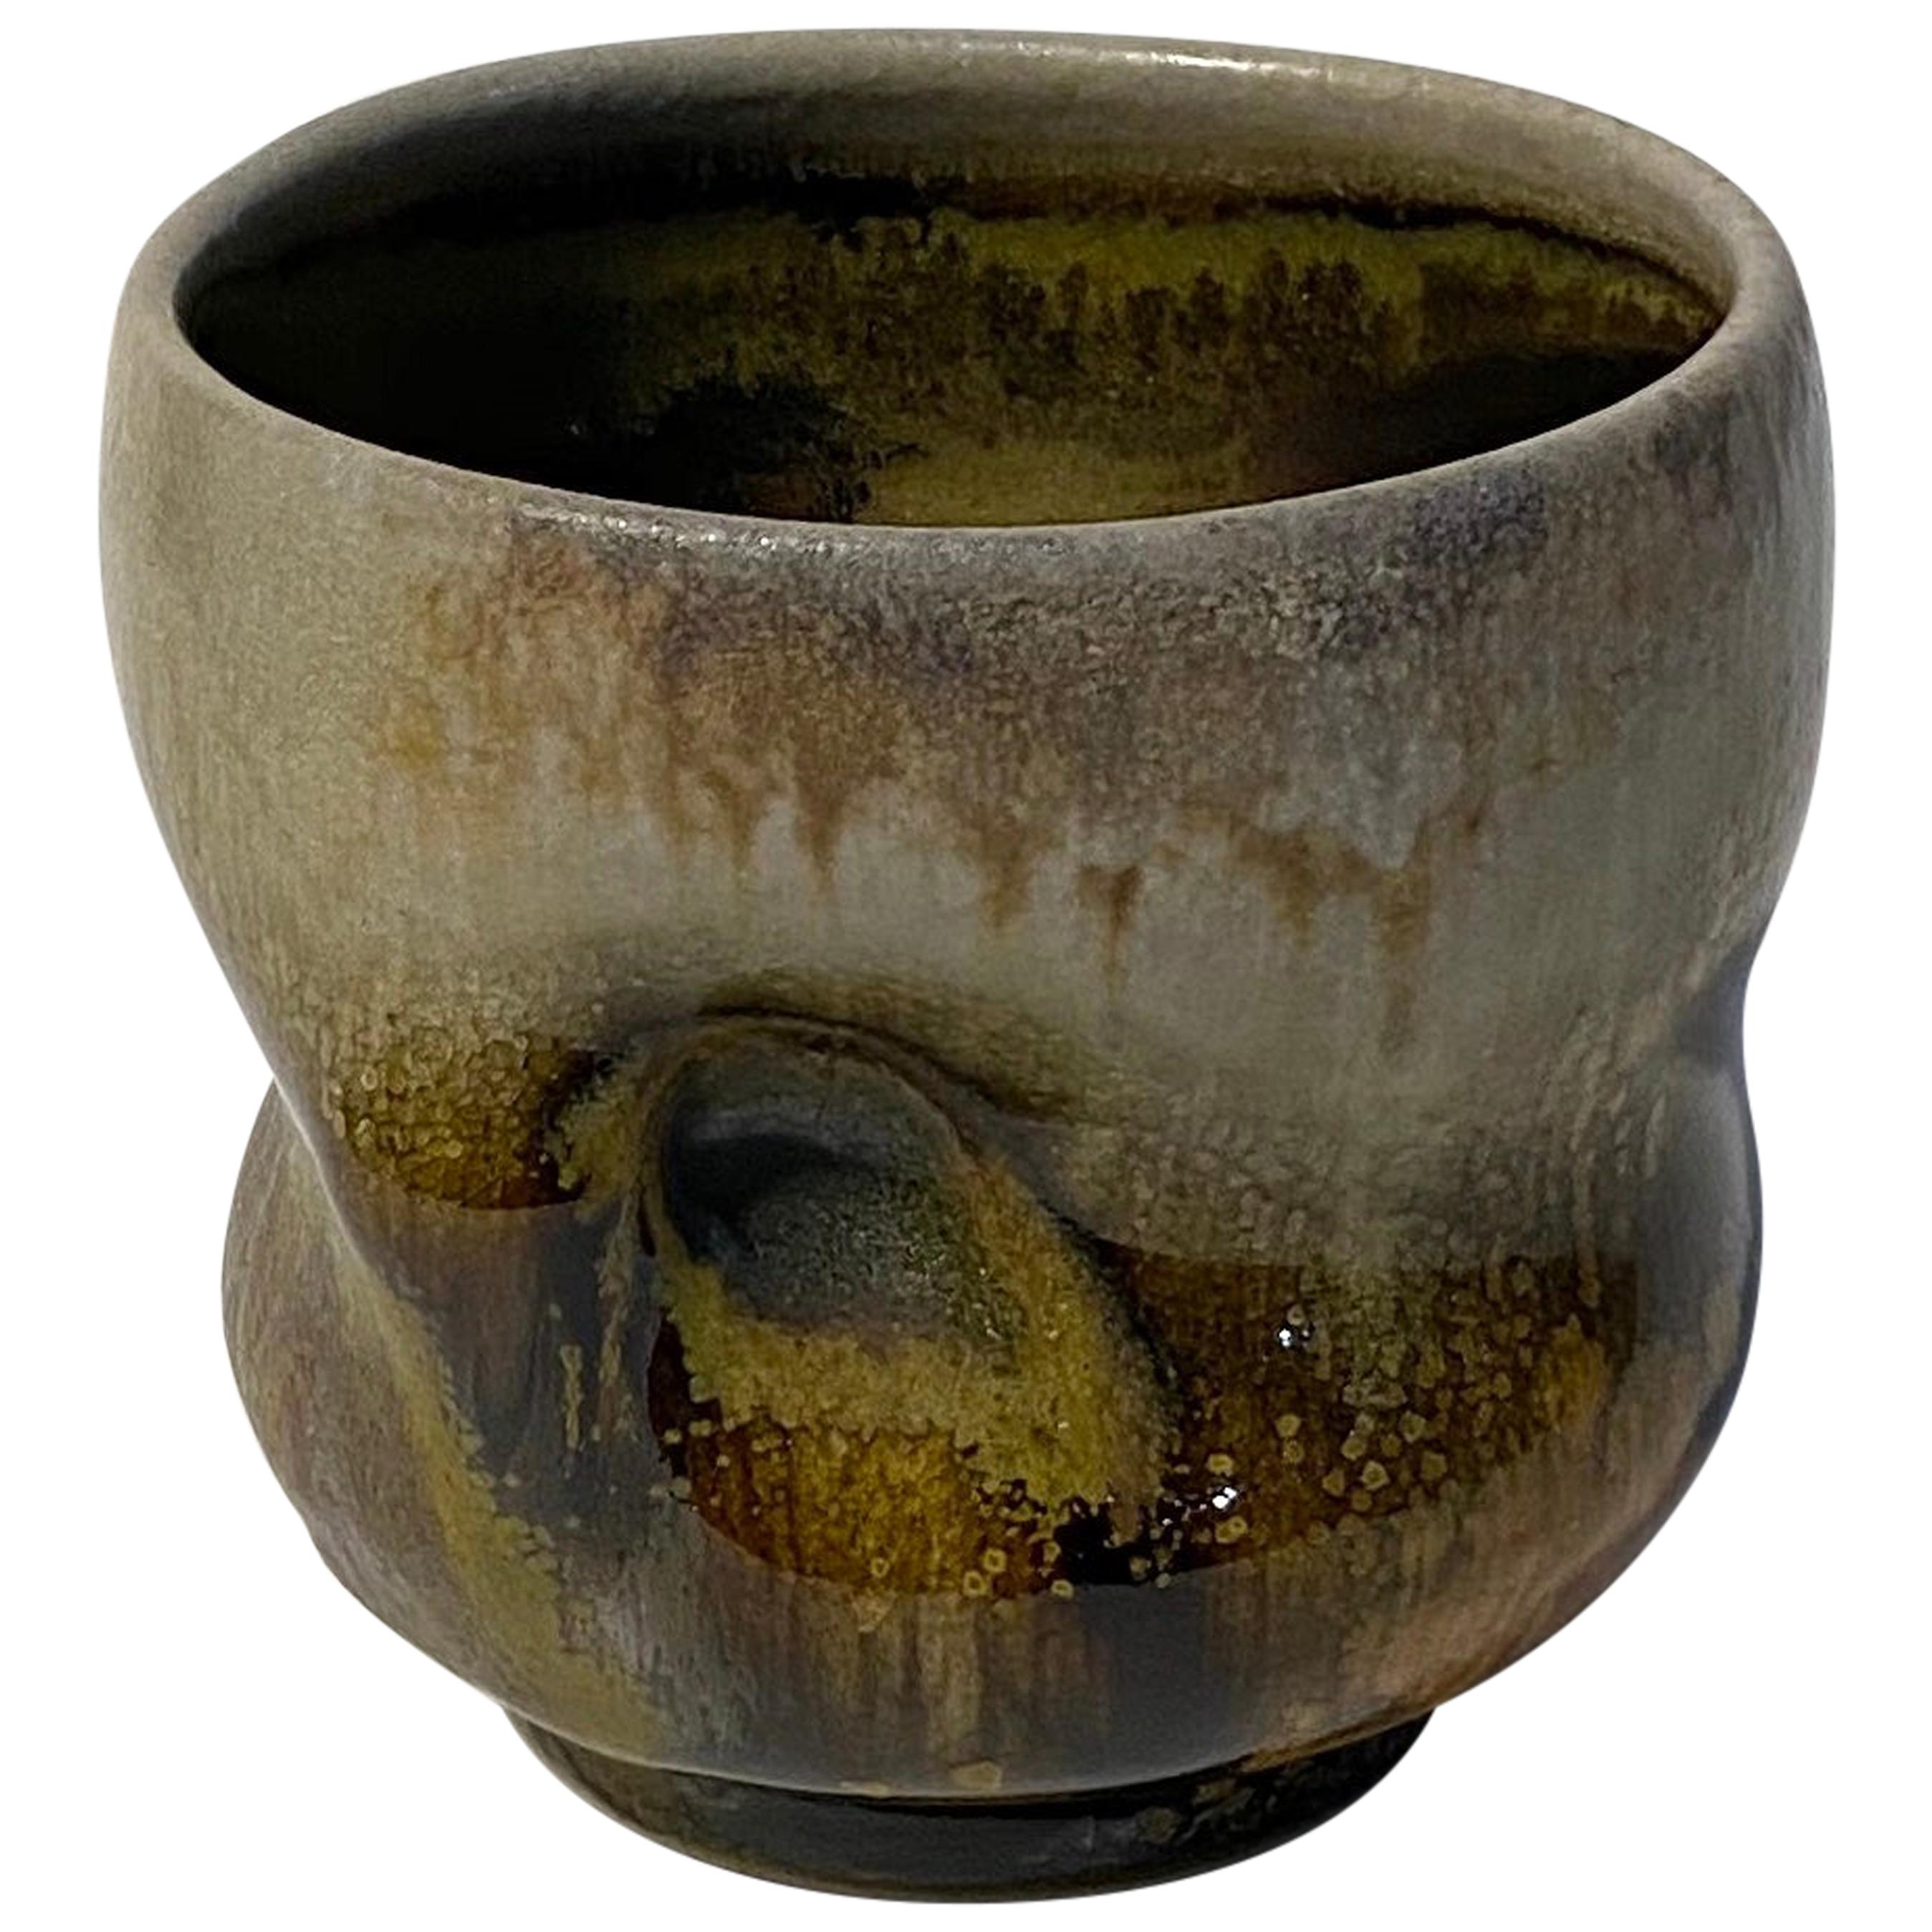 Chris Gustin Whiskey Cup, 2019